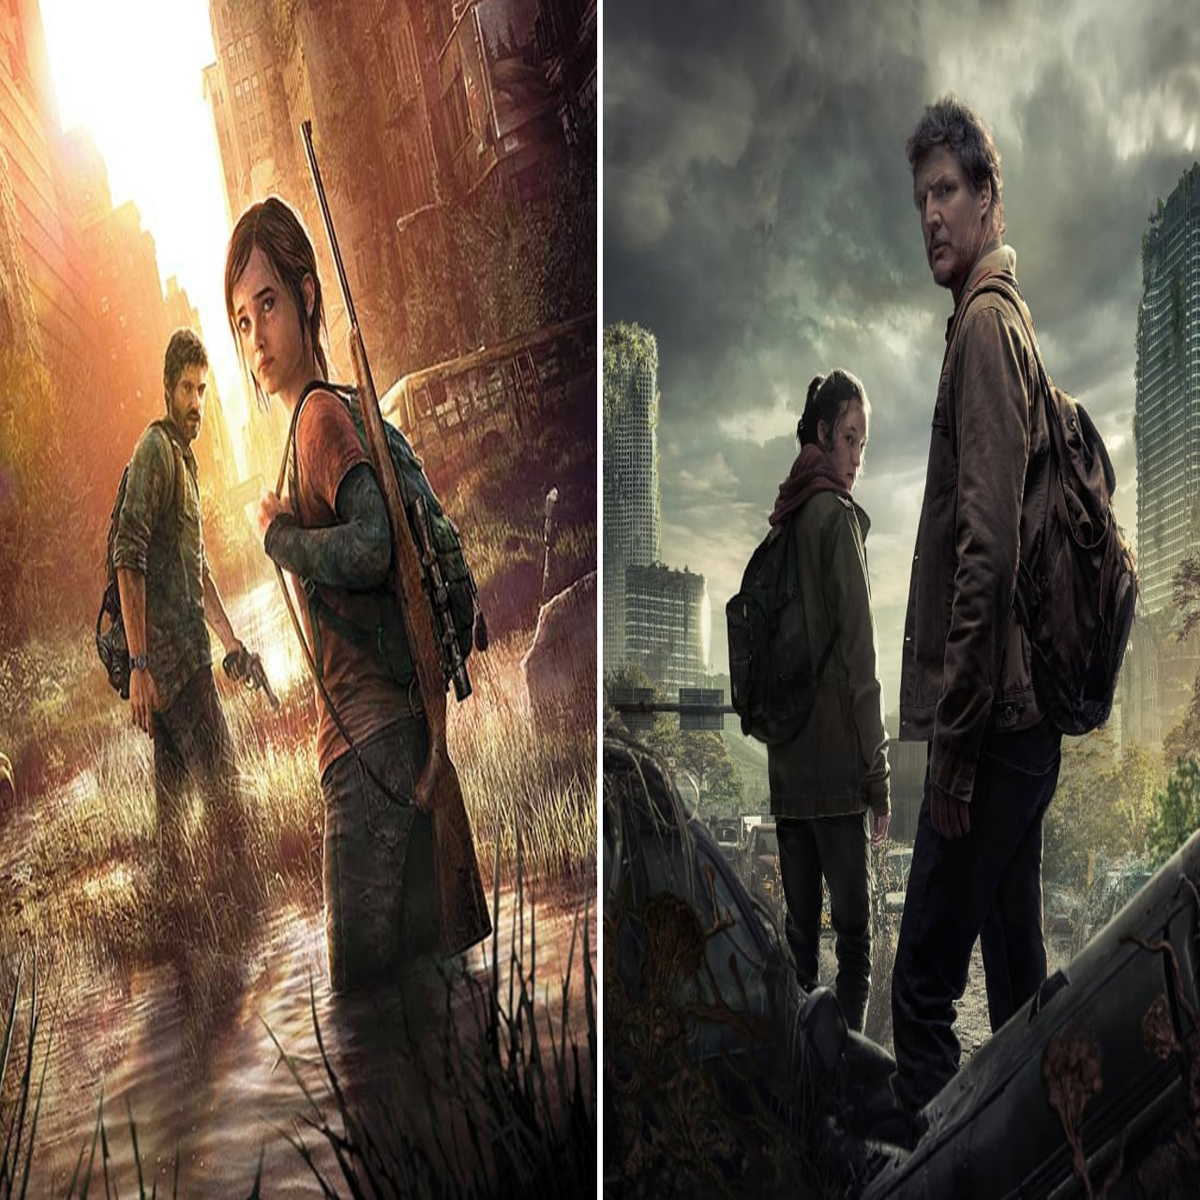 You Can Watch The First Episode Of HBO's The Last Of Us Online For